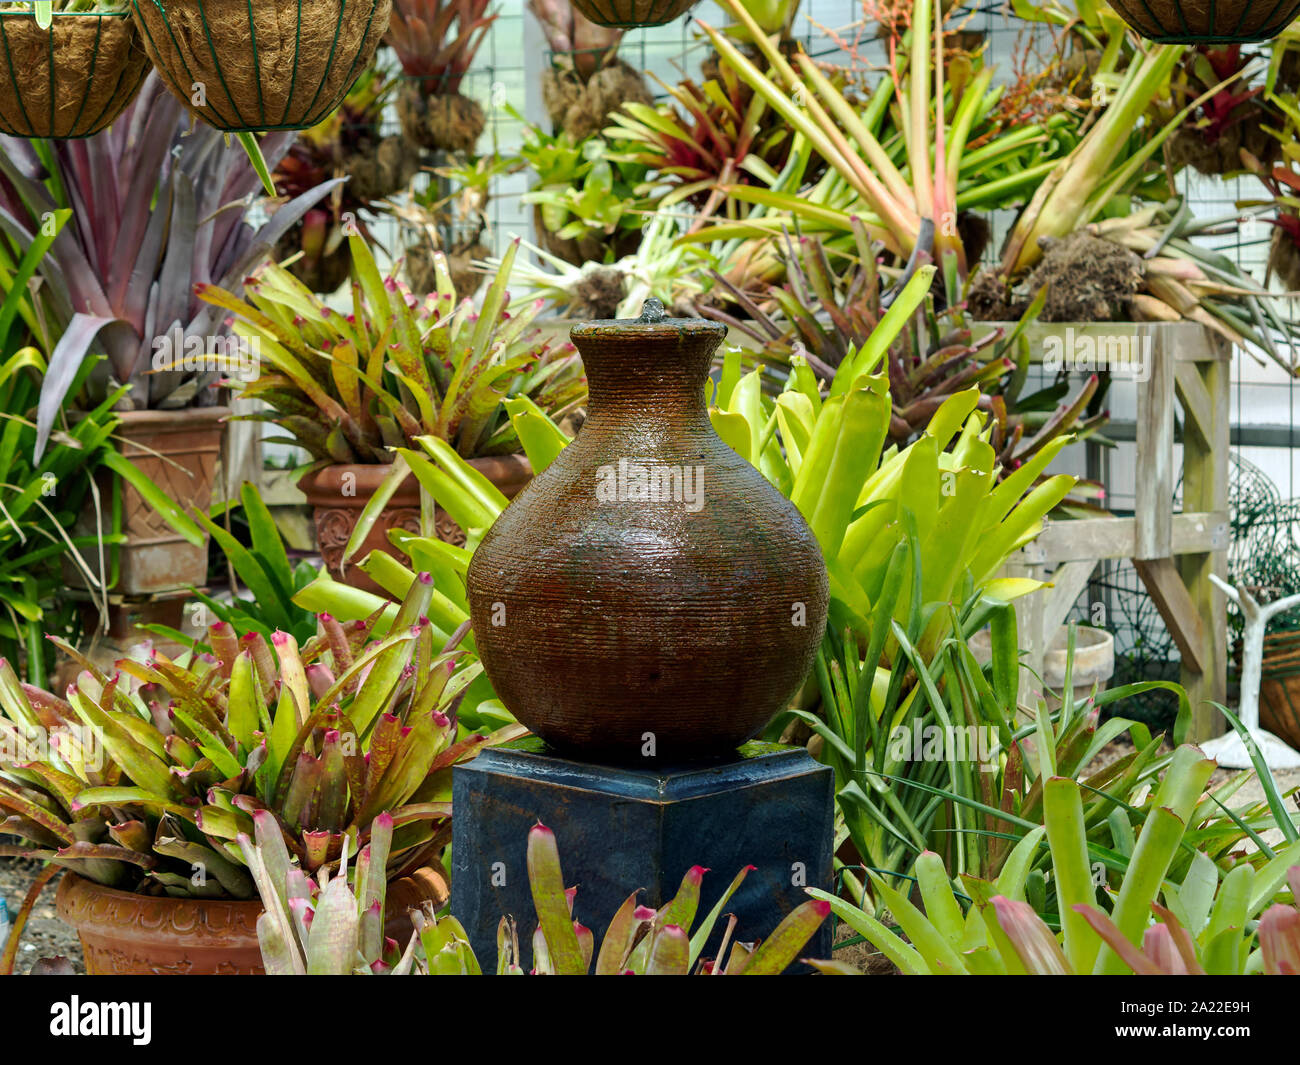 Small, ribbed earthen jar fountain. Anderson Bromeliad Conservatory at the South Texas Botanical Gardens & Nature Center. Corpus Christi, Texas USA. Stock Photo